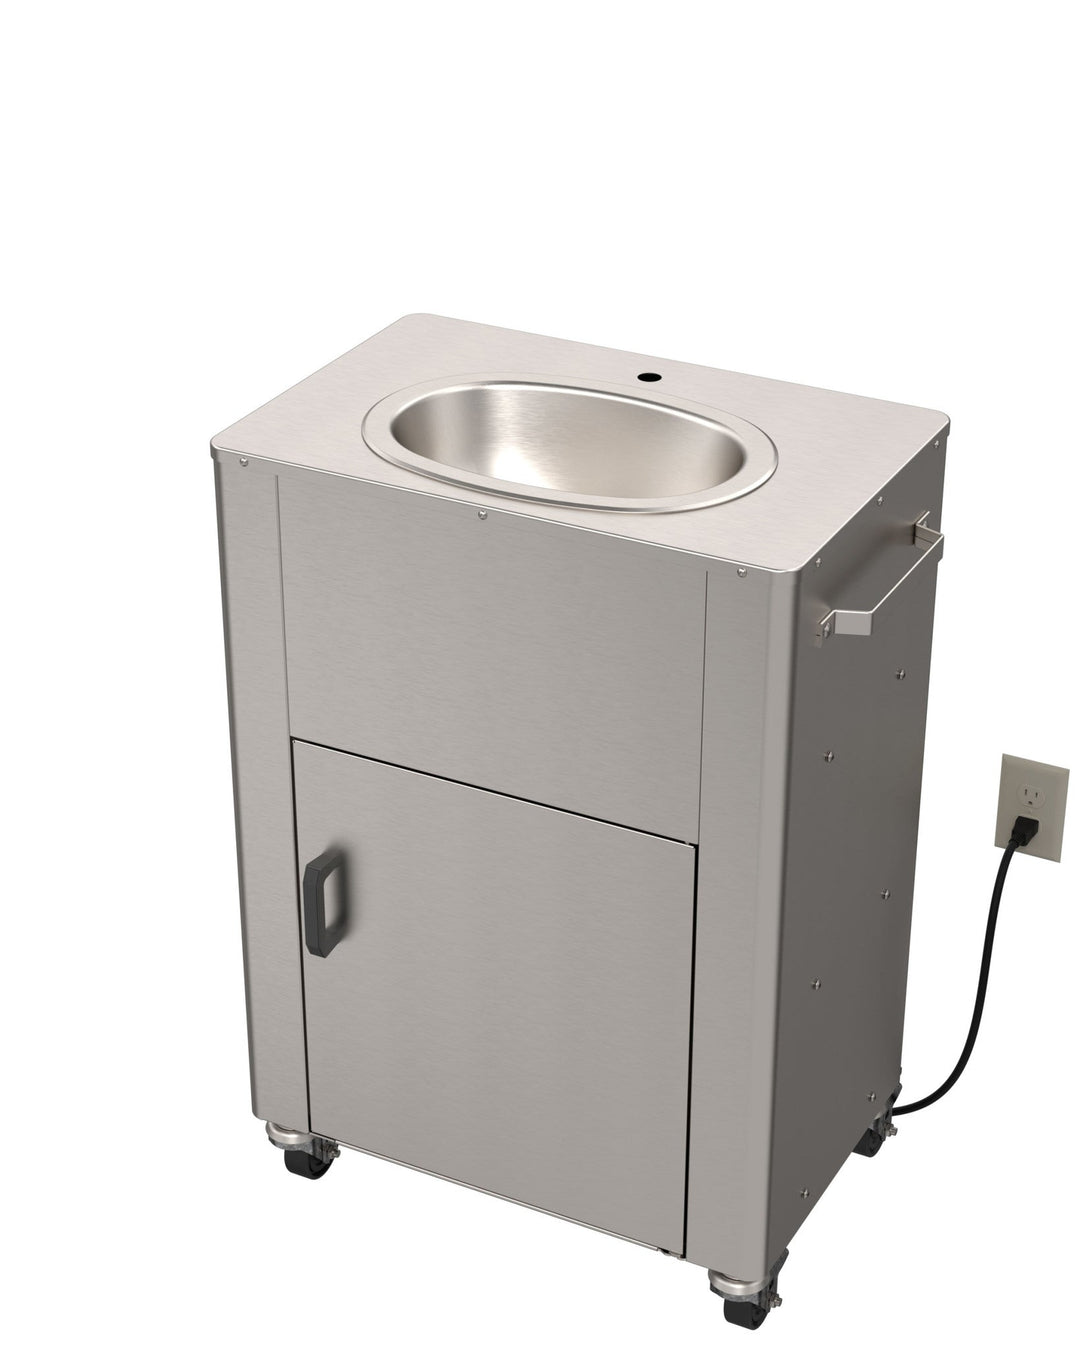 PS1030 On-Demand Pump Portable Sink